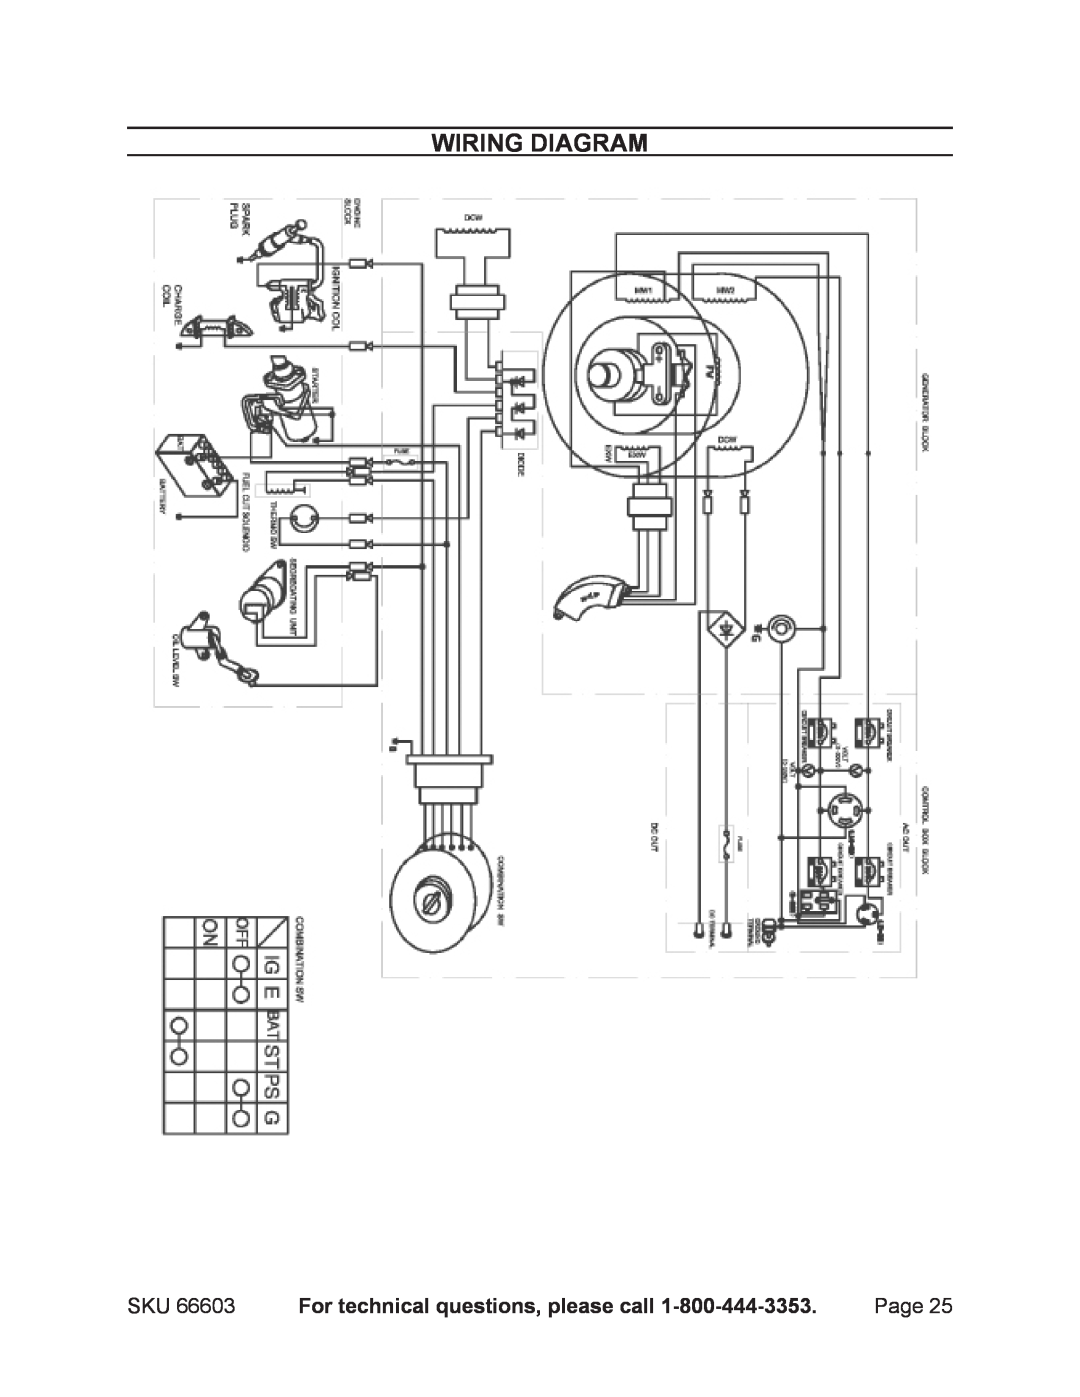 Chicago Electric 66603 manual Wiring Diagram, For technical questions, please call 